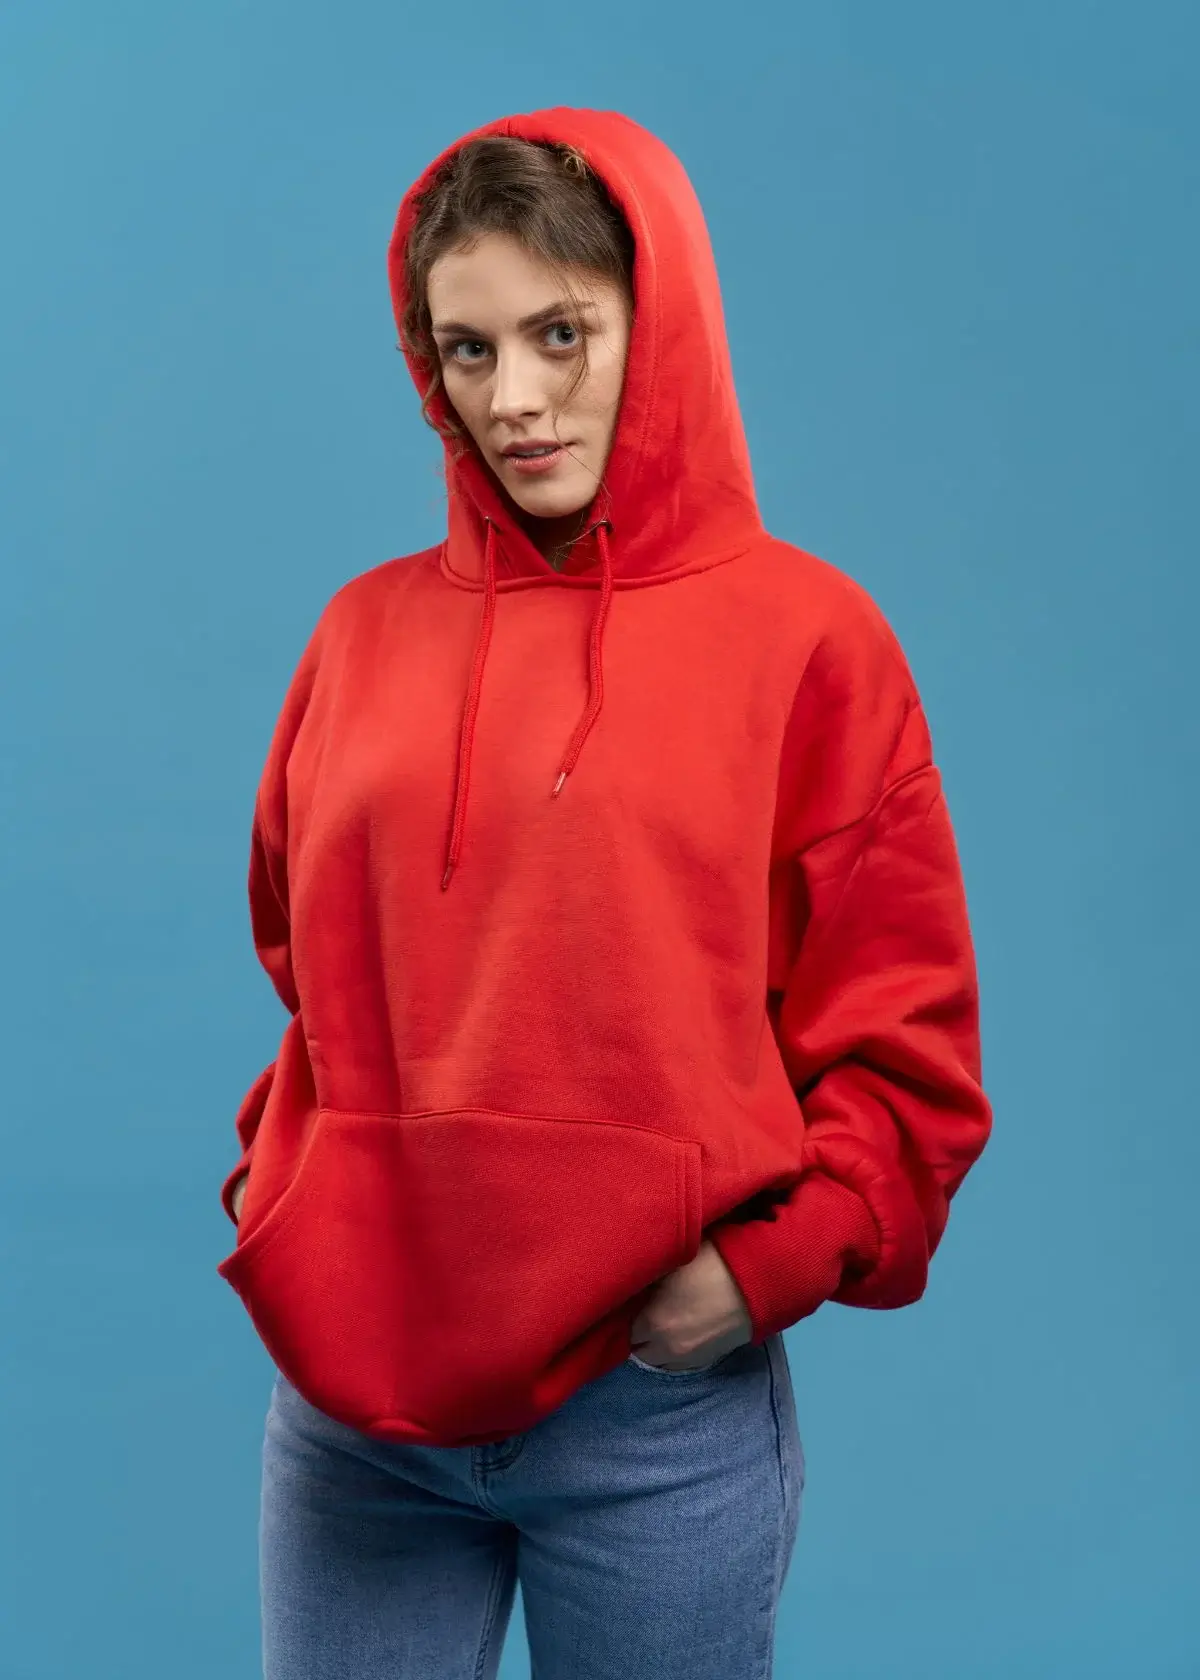 What materials are used for making oversized hoodies?